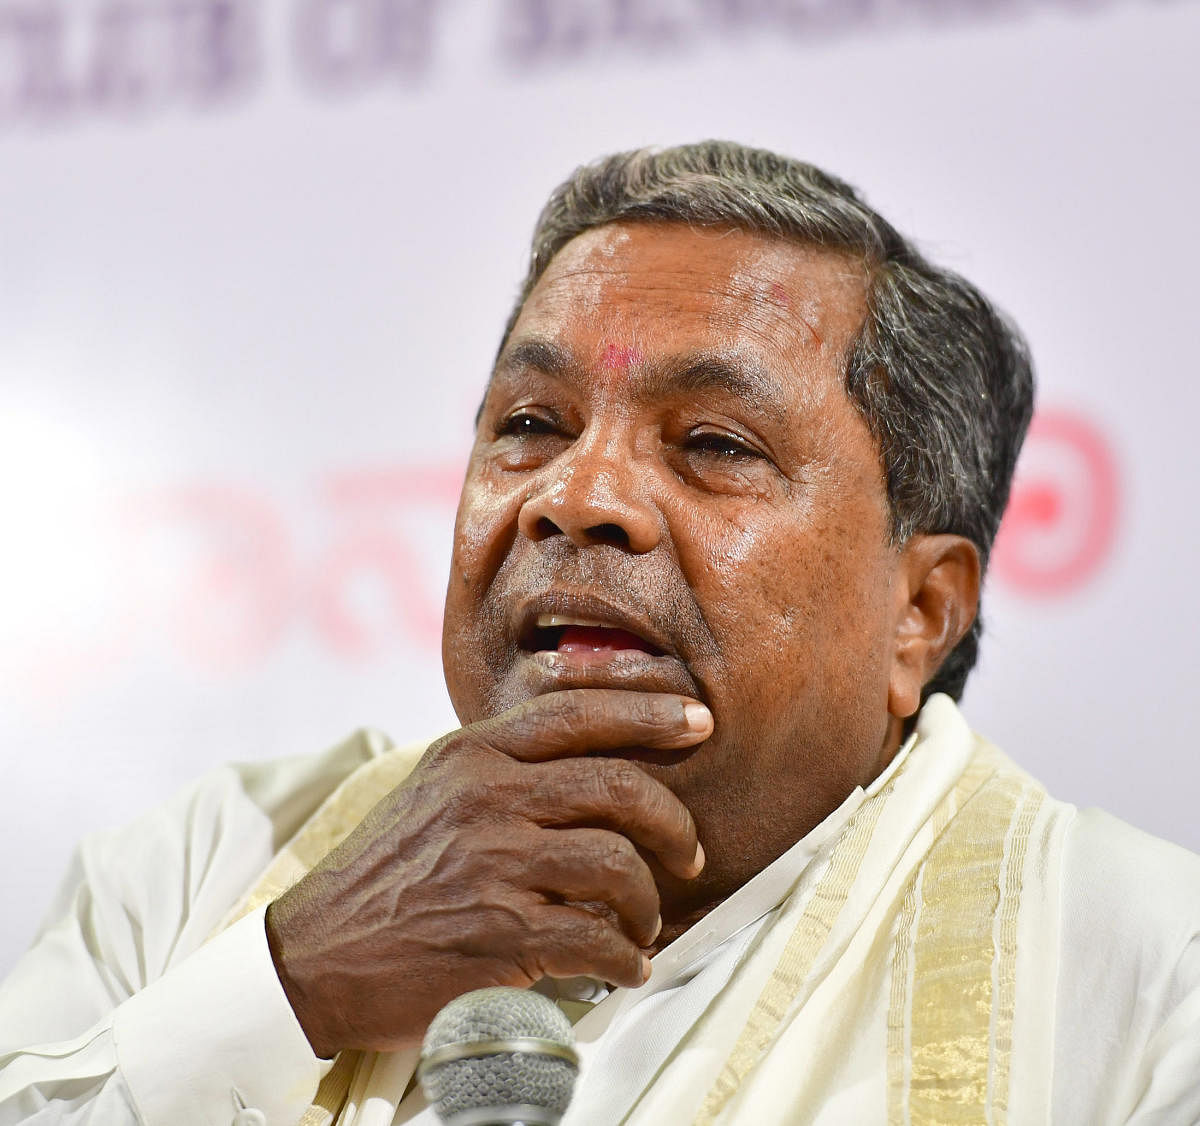 Reddy's remarks coming days after Siddaramaiah's comments about becoming chief minister again fuels speculation that all is not well within the Congress-JDS coalition. DH File Photo